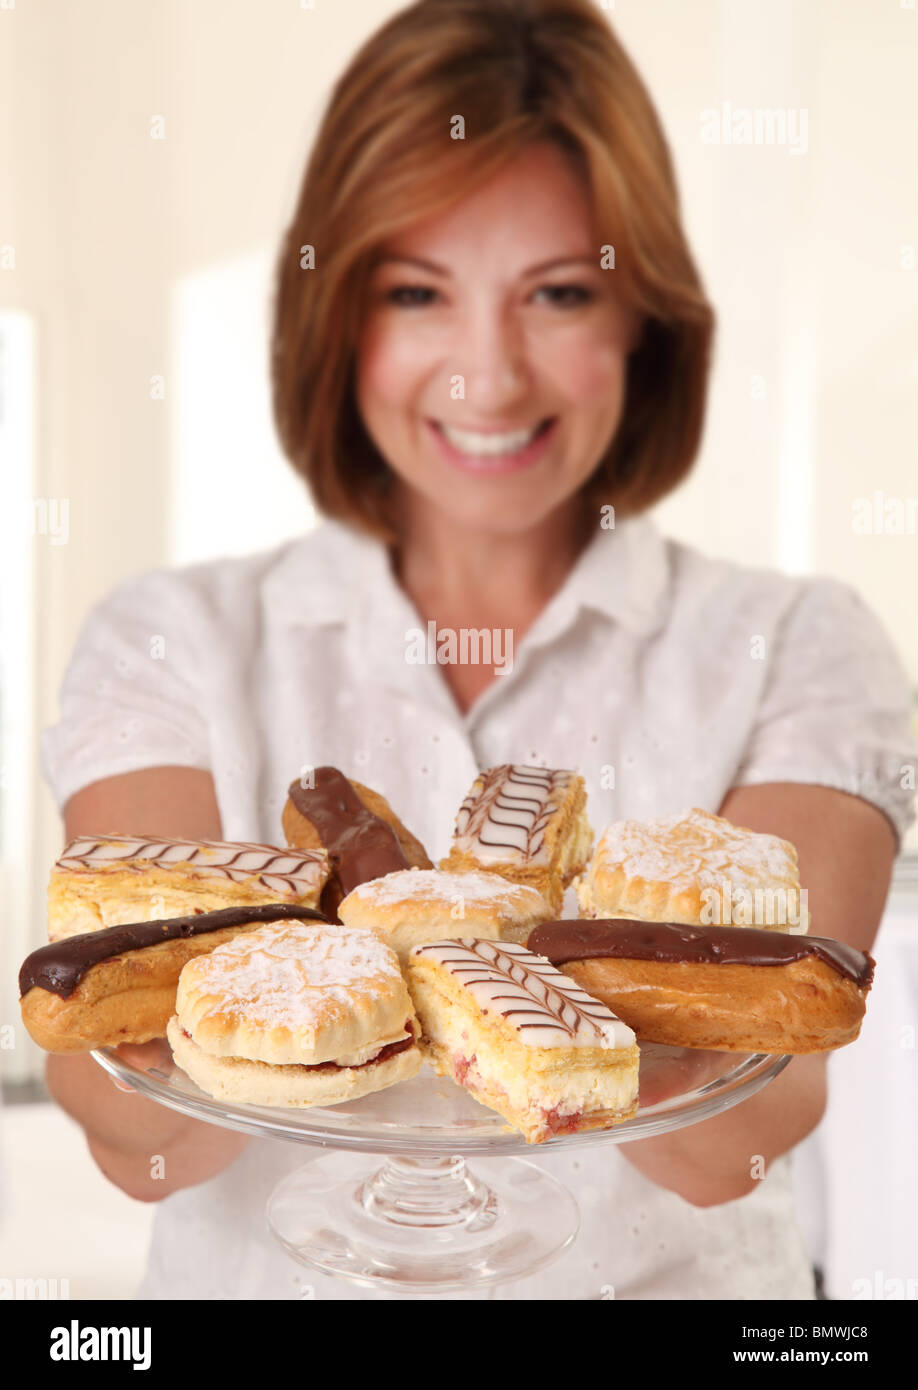 WOMAN HOLDING PLATE OF FRESH CREAM CAKES Stock Photo